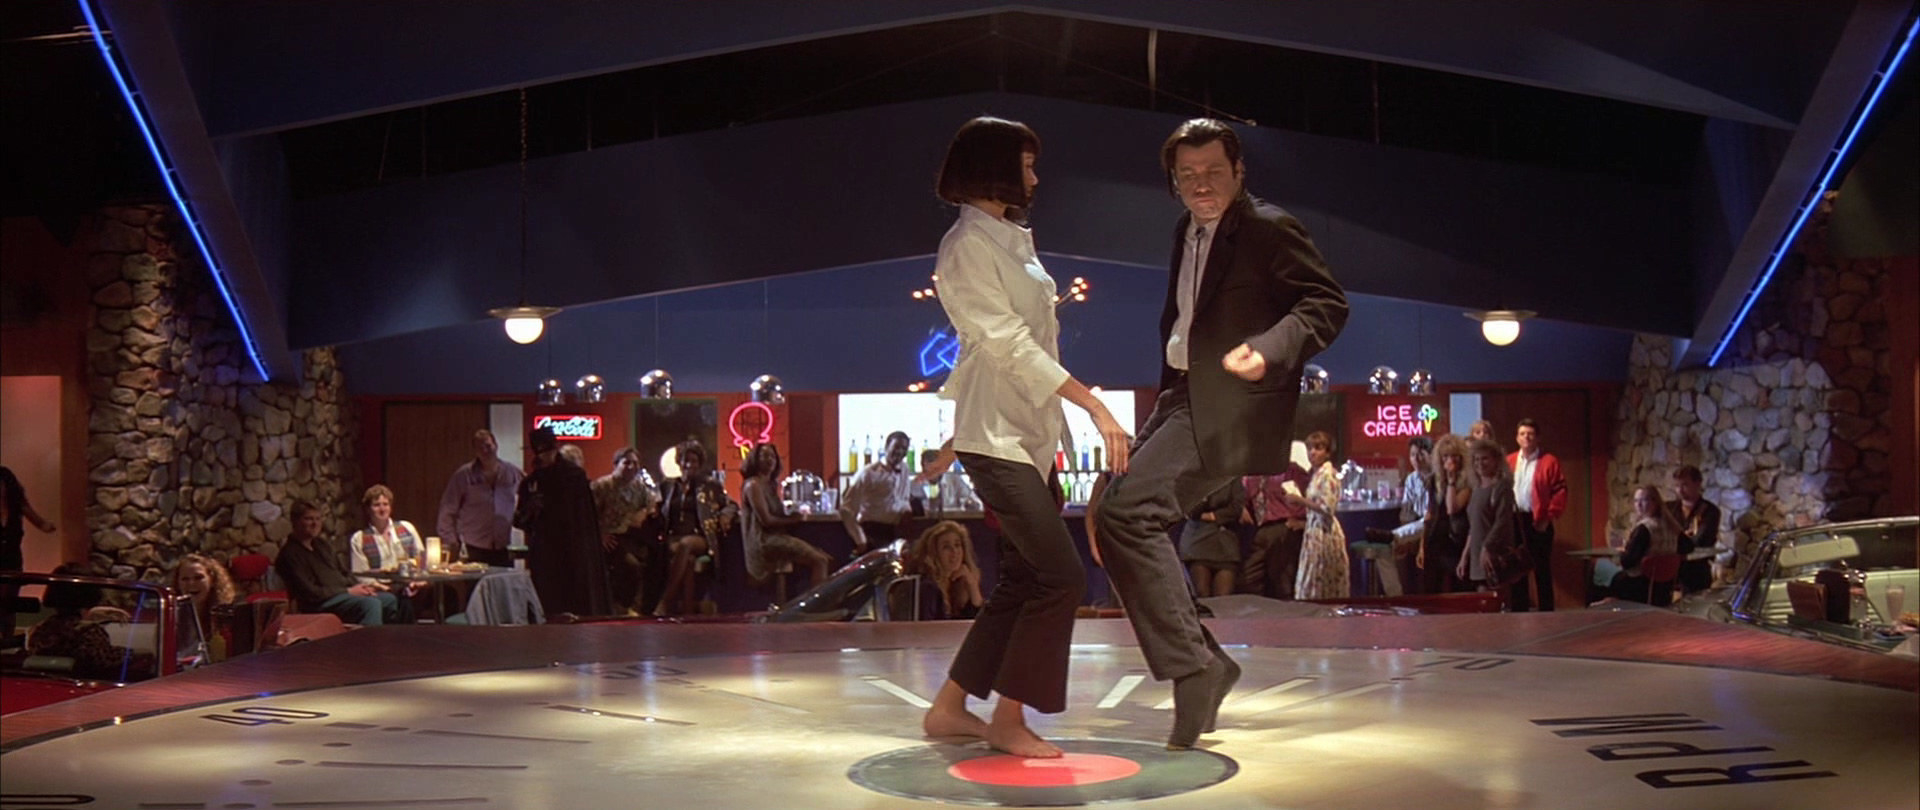 A man and woman dancing on an empty dance floor together in front of a crowd.